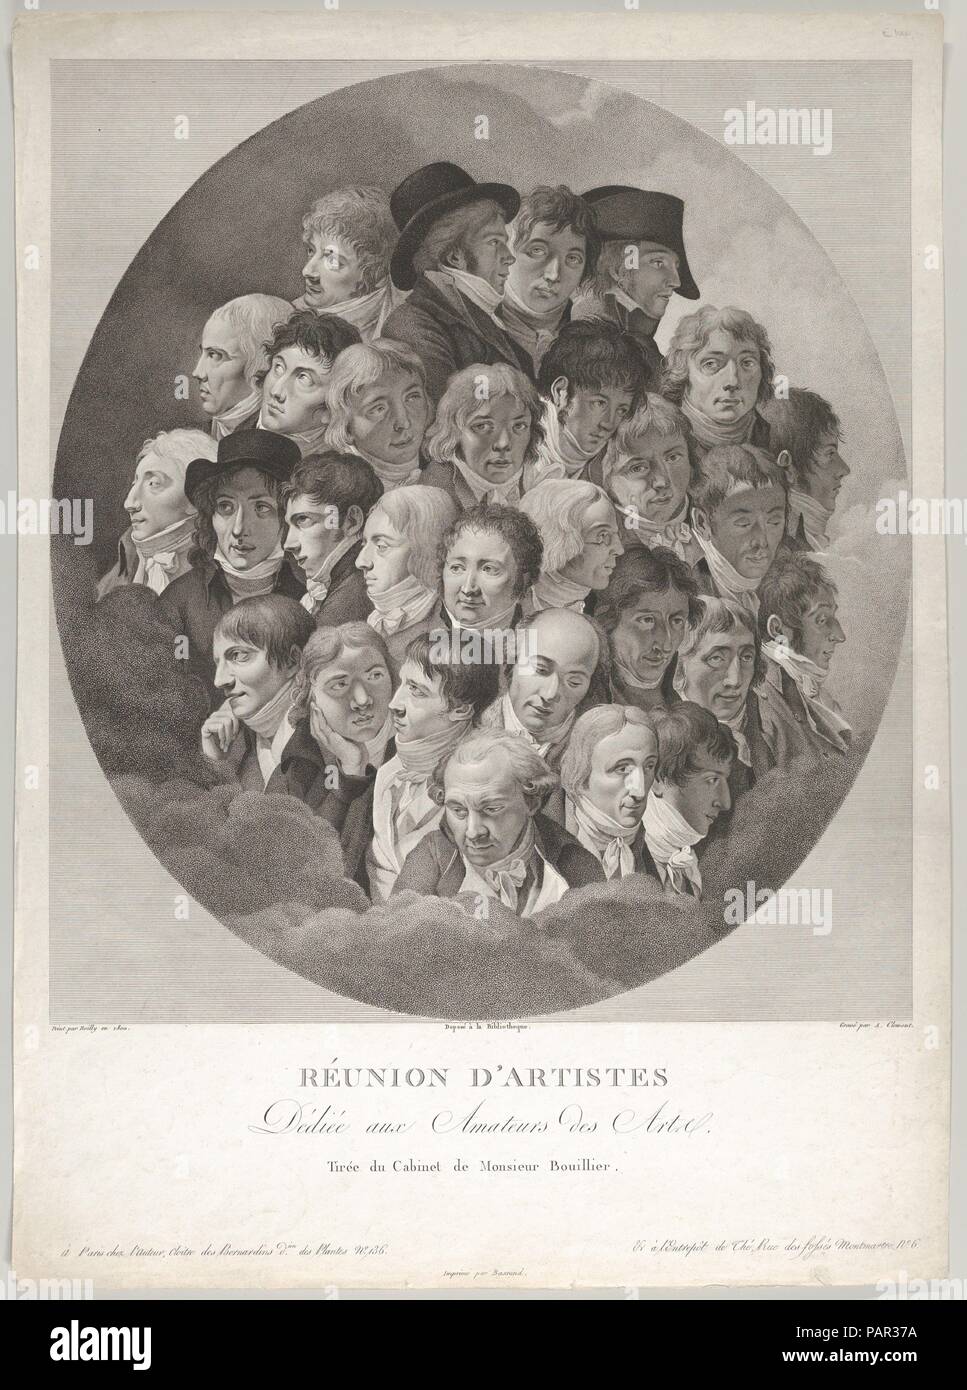 Réunion d'Artistes (Reunion of Artists). Artist: After Louis Léopold Boilly (French, La Bassée 1761-1845 Paris); Alexandre Clément (French, ca. 1775-?1808). Dimensions: Sheet: 20 1/2 × 15 1/8 in. (52 × 38.4 cm)  Image: 15 1/2 × 13 7/8 in. (39.3 × 35.2 cm). Date: 1804.  This print reflects the popularity of Boilly's painting, Reunion of Artists in Isabey's Studio (1798, Musée du Louvre, Paris). Grouped into an oval surround, the 29 heads are portraits of artists, architects, and actors, all well-known figures of the day. Museum: Metropolitan Museum of Art, New York, USA. Stock Photo